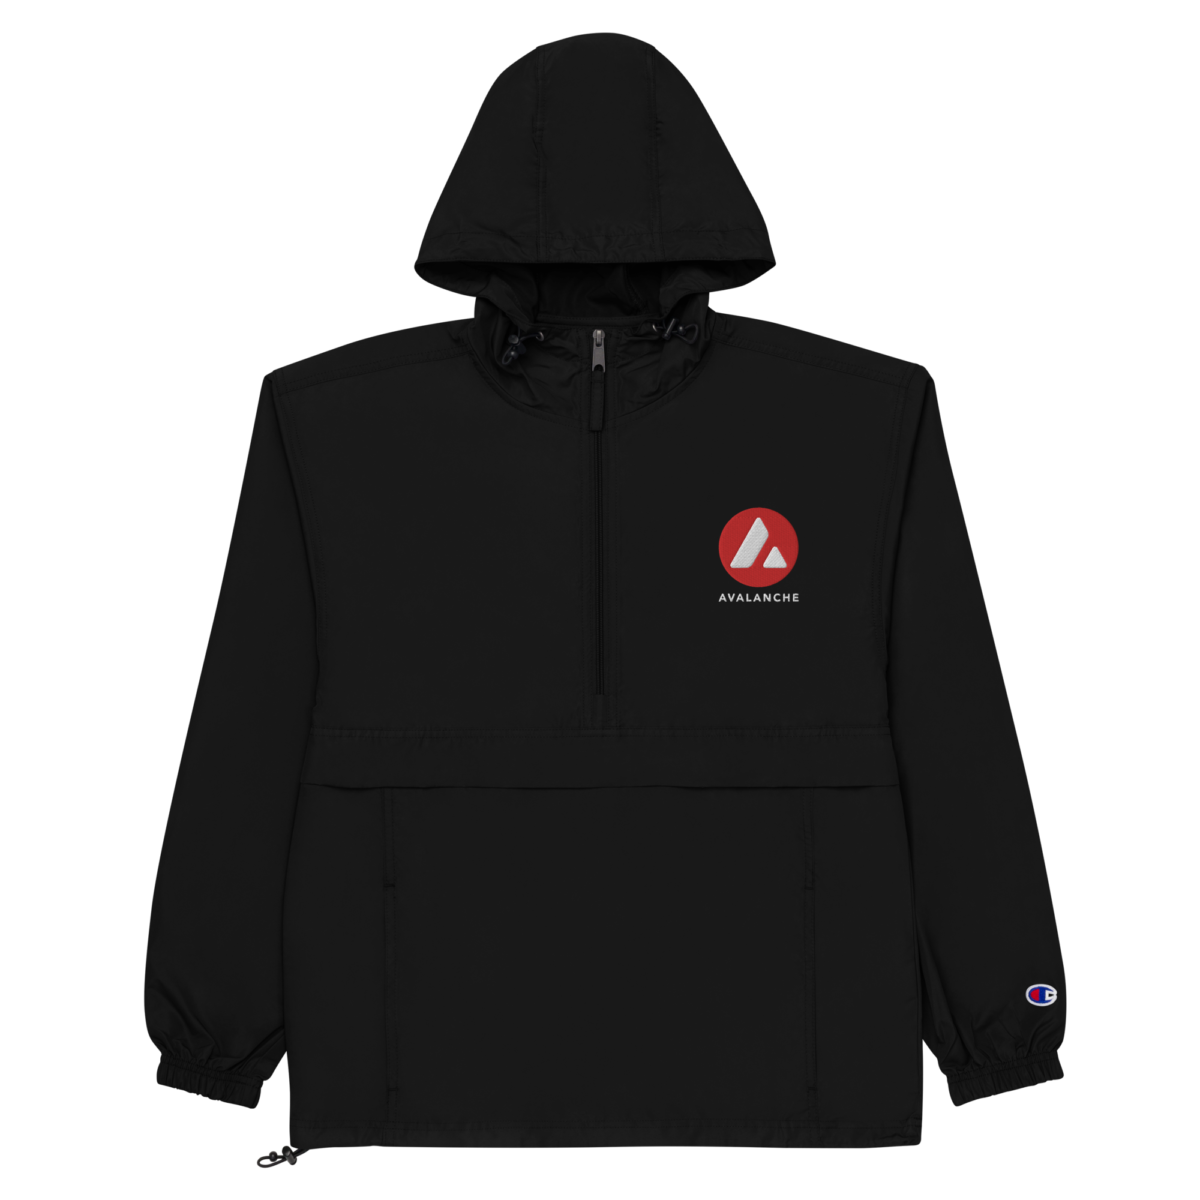 embroidered champion packable jacket black front 631f4f2b78df3 - Avalanche Champion Packable Jacket